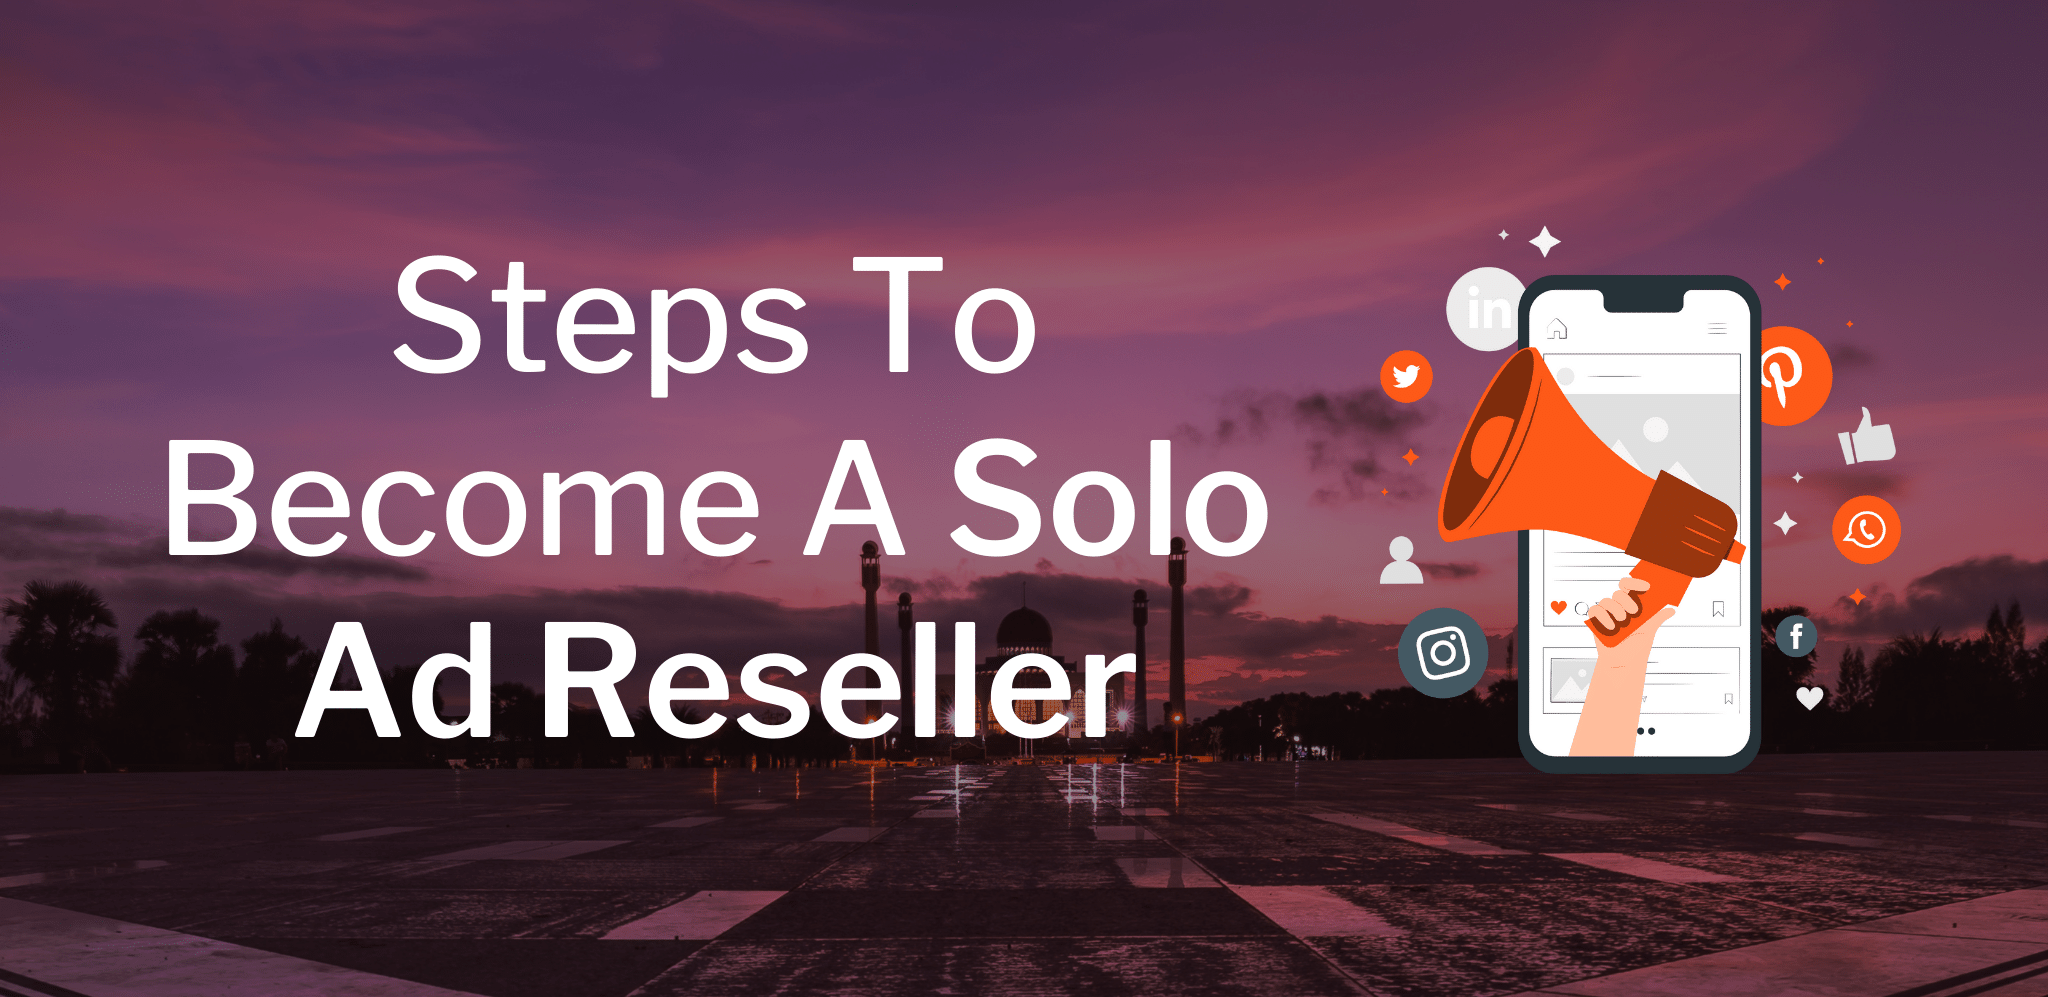 Steps To Become A Solo Ad Reseller